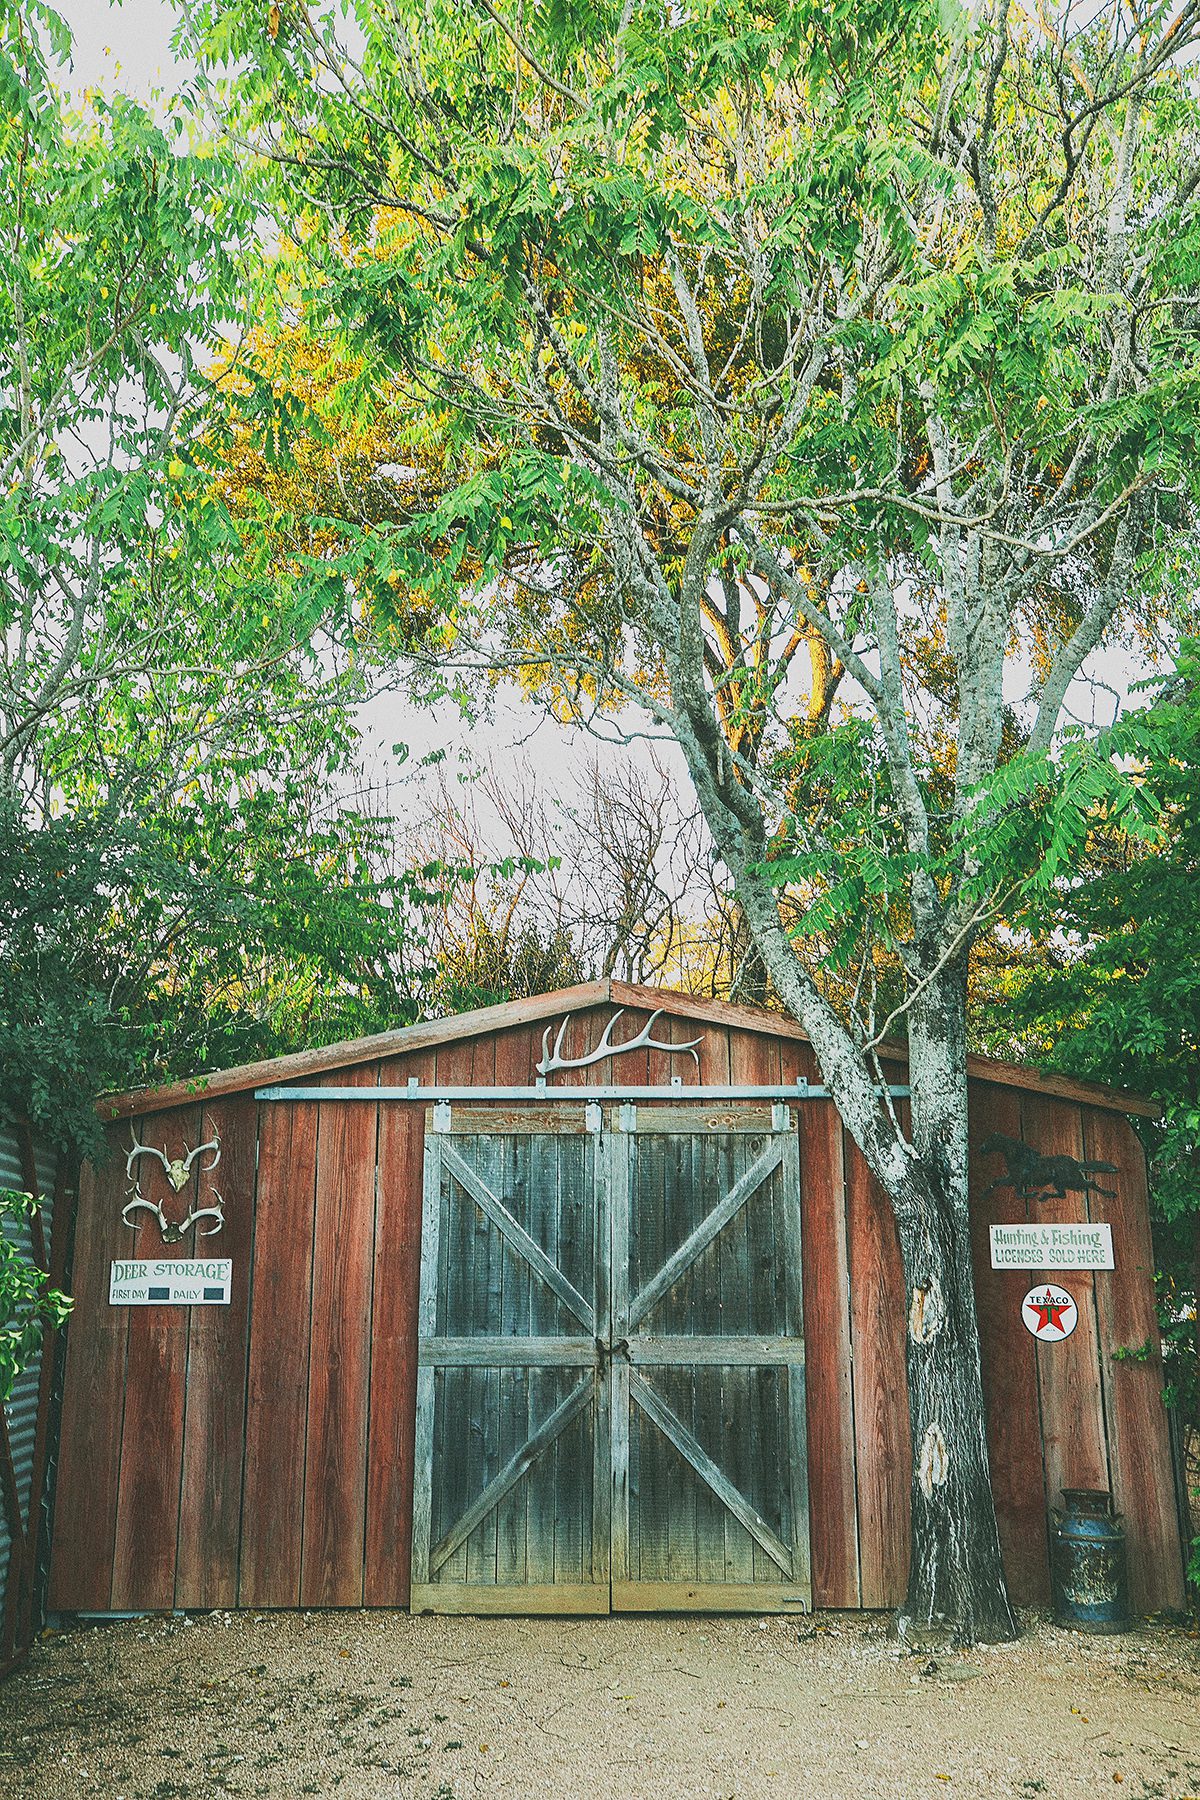 Dripping Springs historical deer shed at the Station